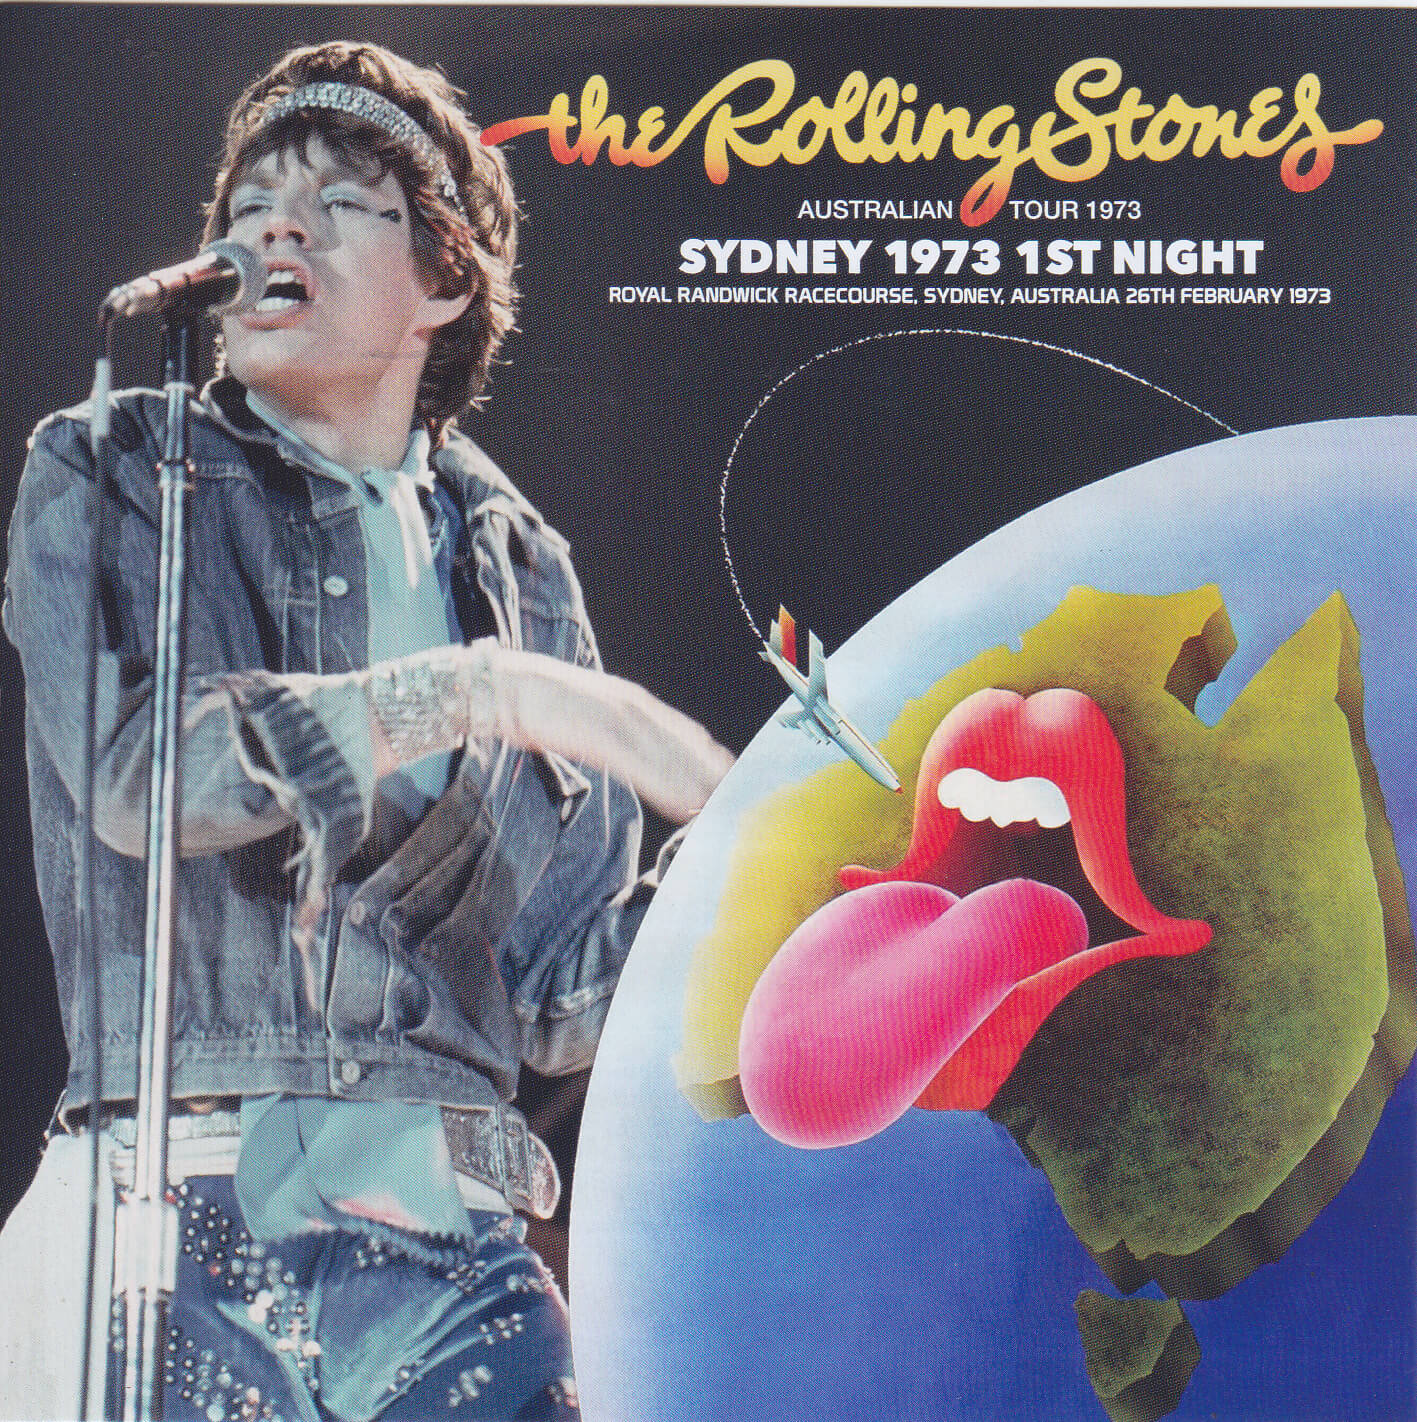 ROLLING STONES - SYDNEY 1973 1ST NIGHT - NUMBERED JAPANESE EDITION